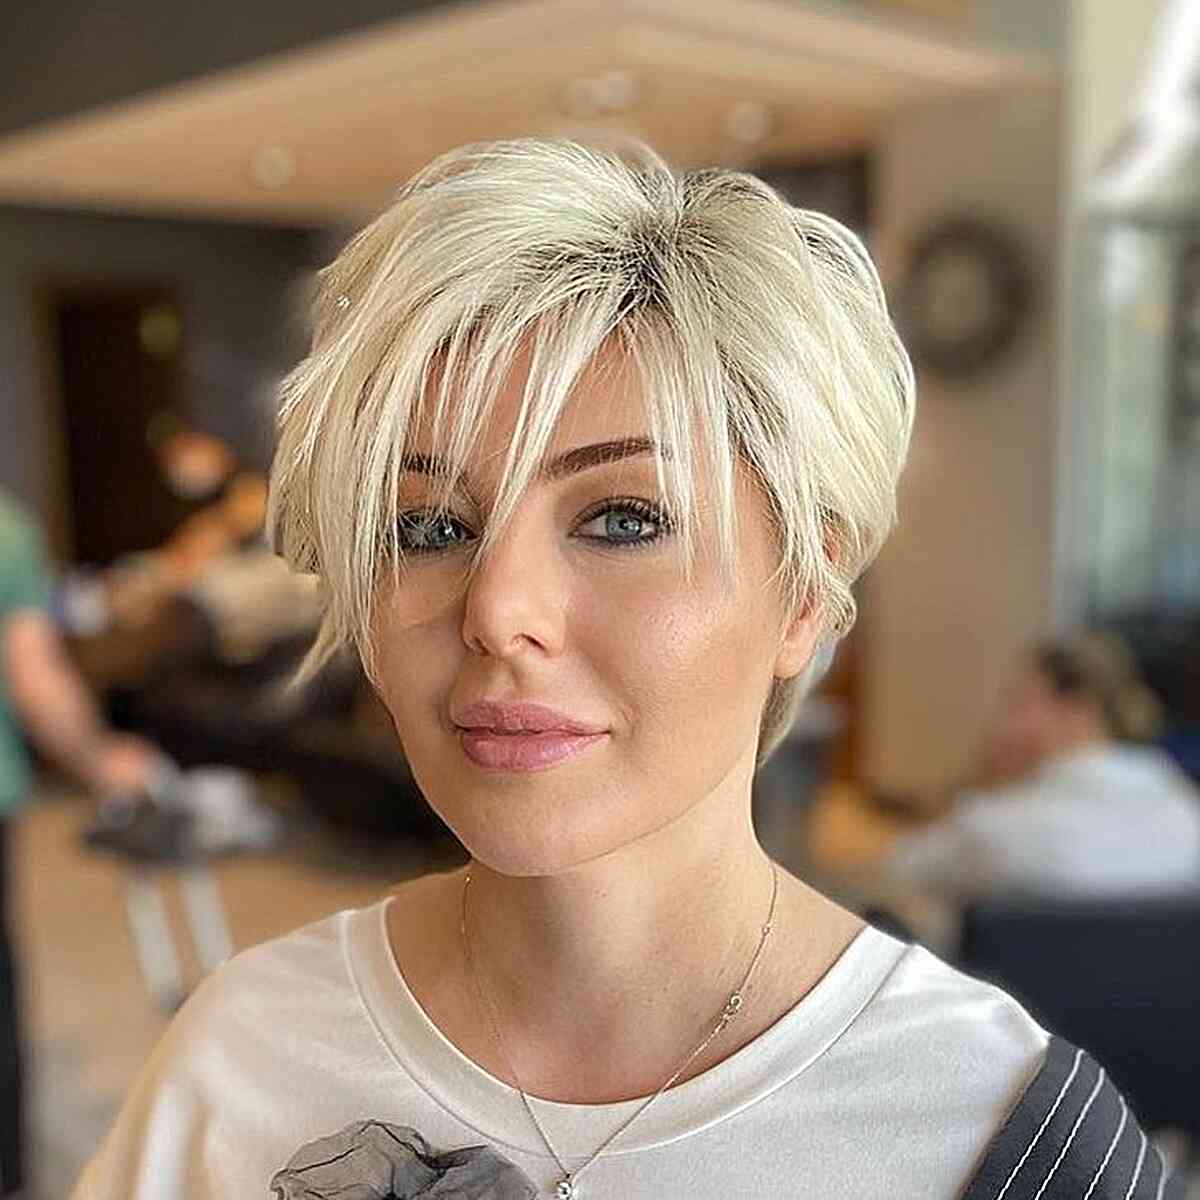 Long Blonde Textured Pixie That's Swept to the Side